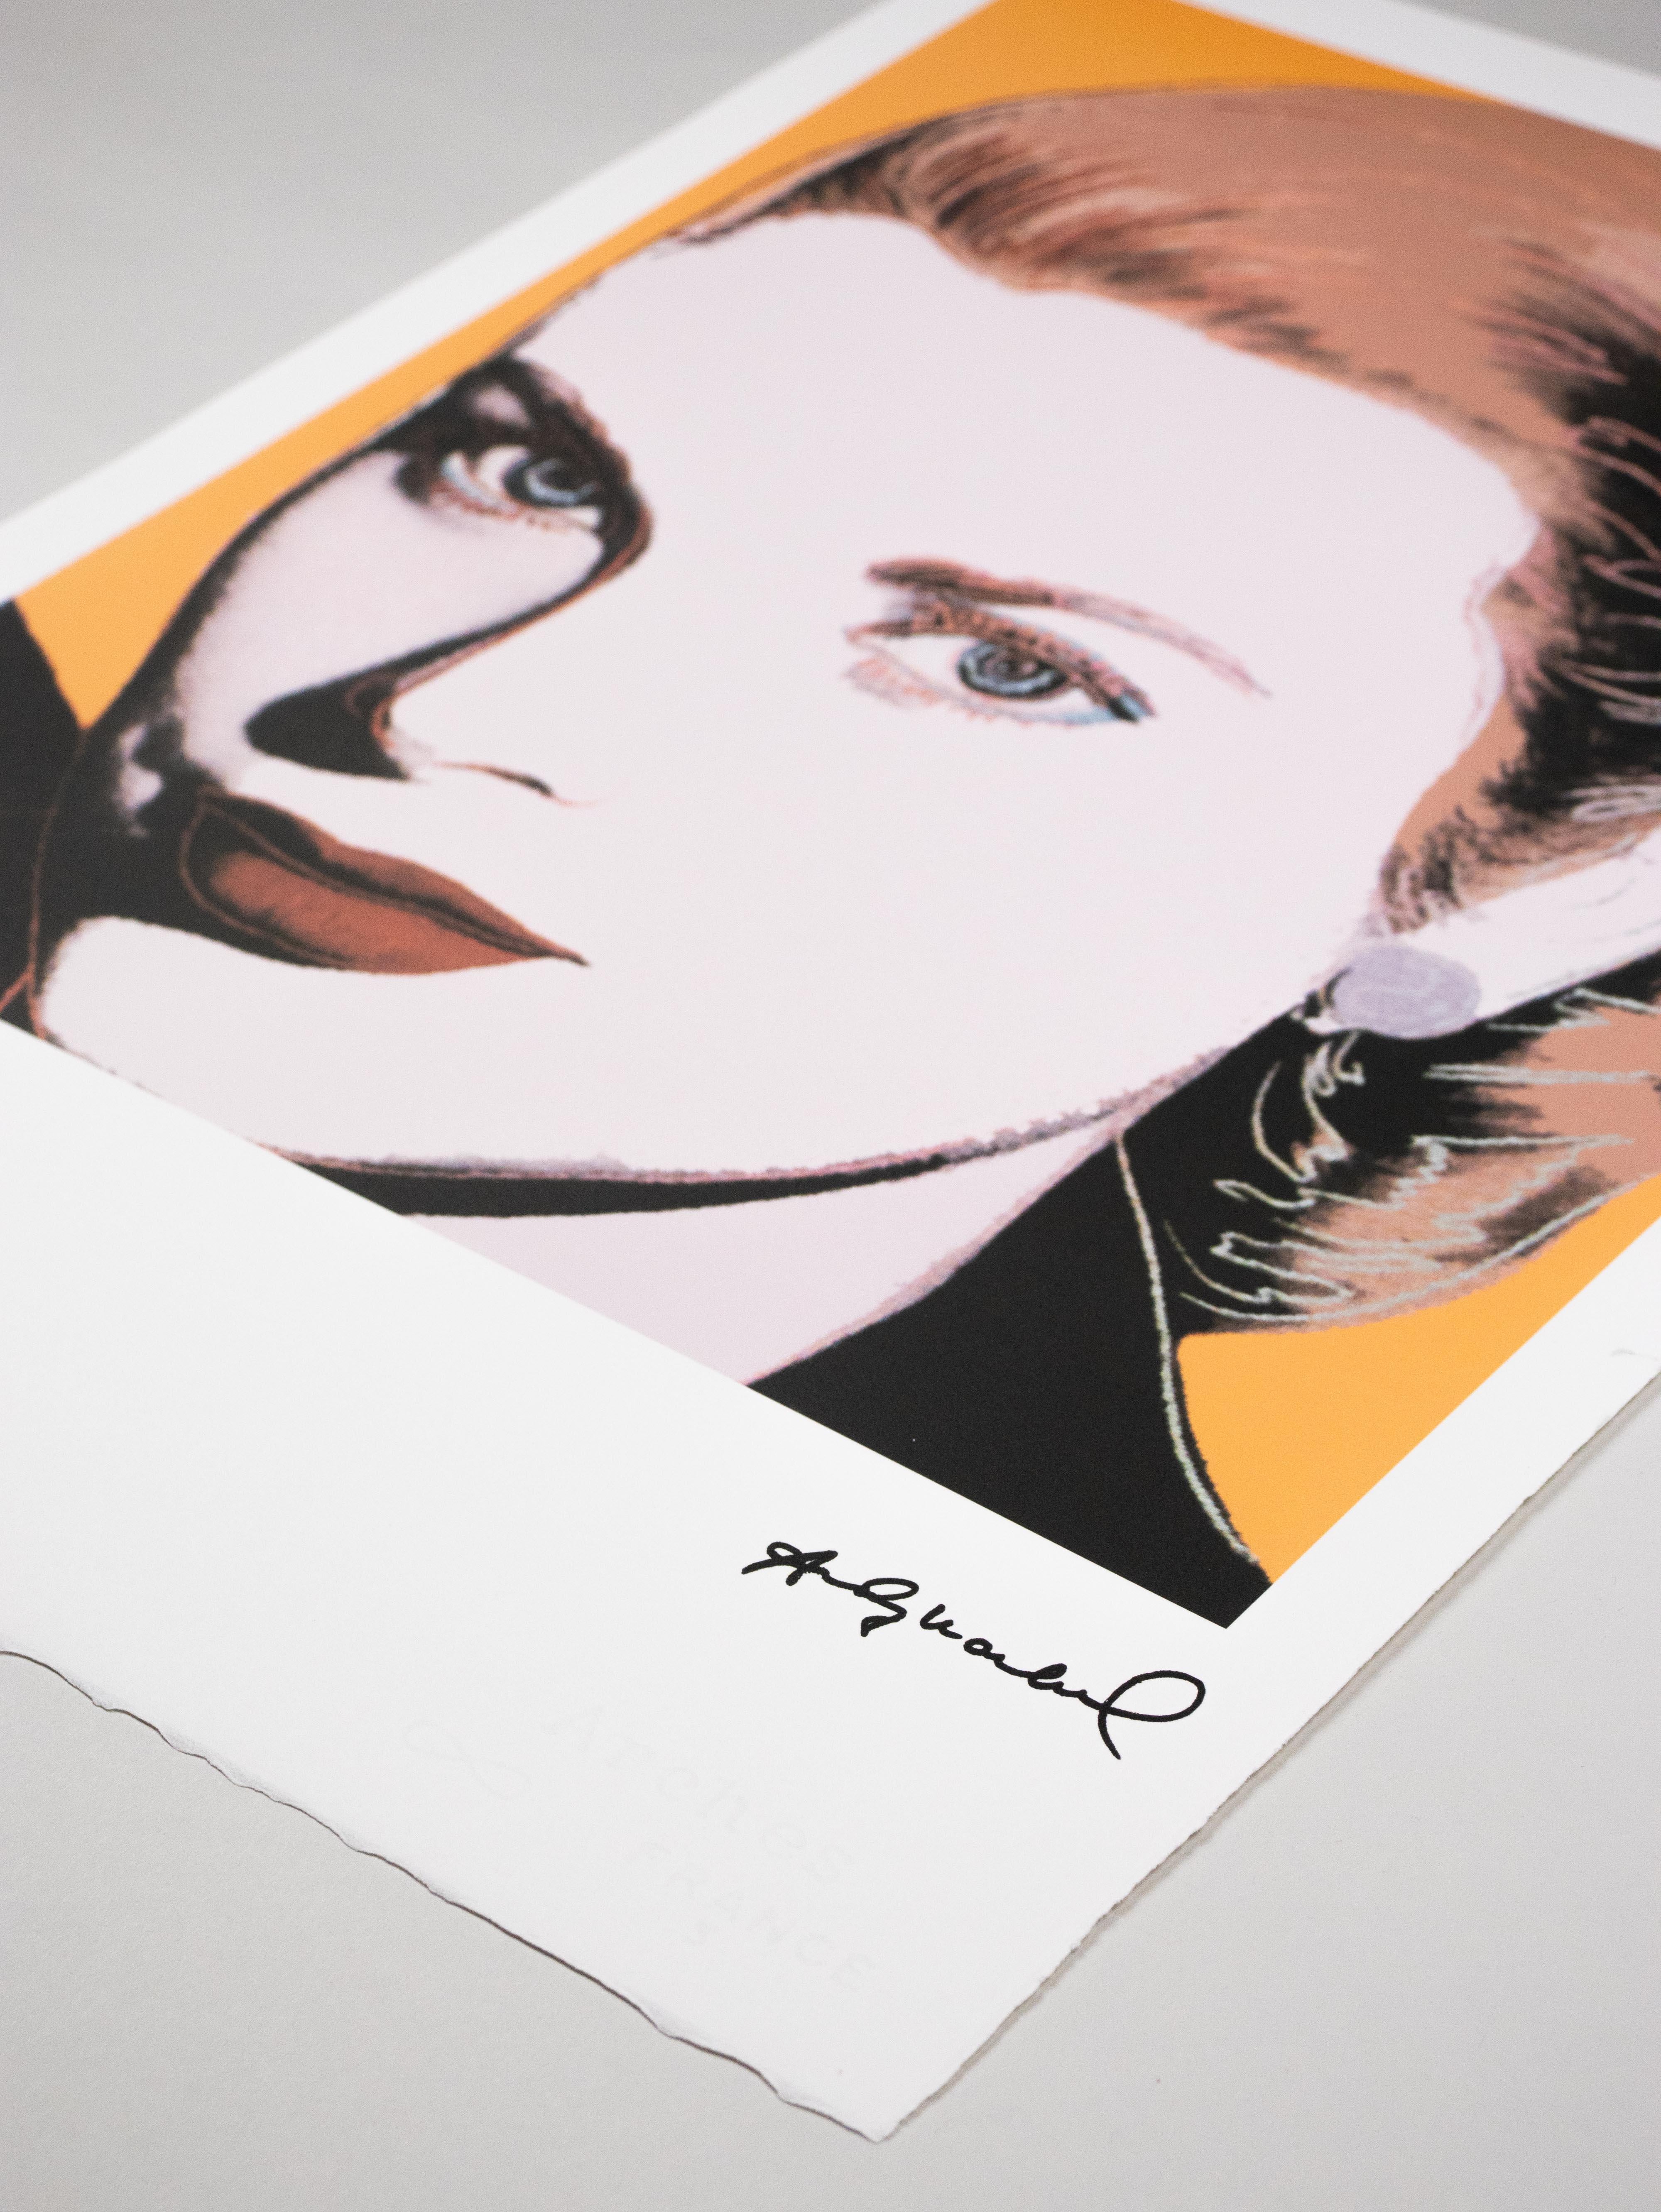 ANDY WARHOL – Grace Kelly
Rare and limited 1980s edition by Georges Israel Editeur Paris/Leo Castelli New York

Only 100 copies total (here 26/100).
Original lithograph on handmade Arches paper incl. watermark.

Signed in plate.
Edition hand